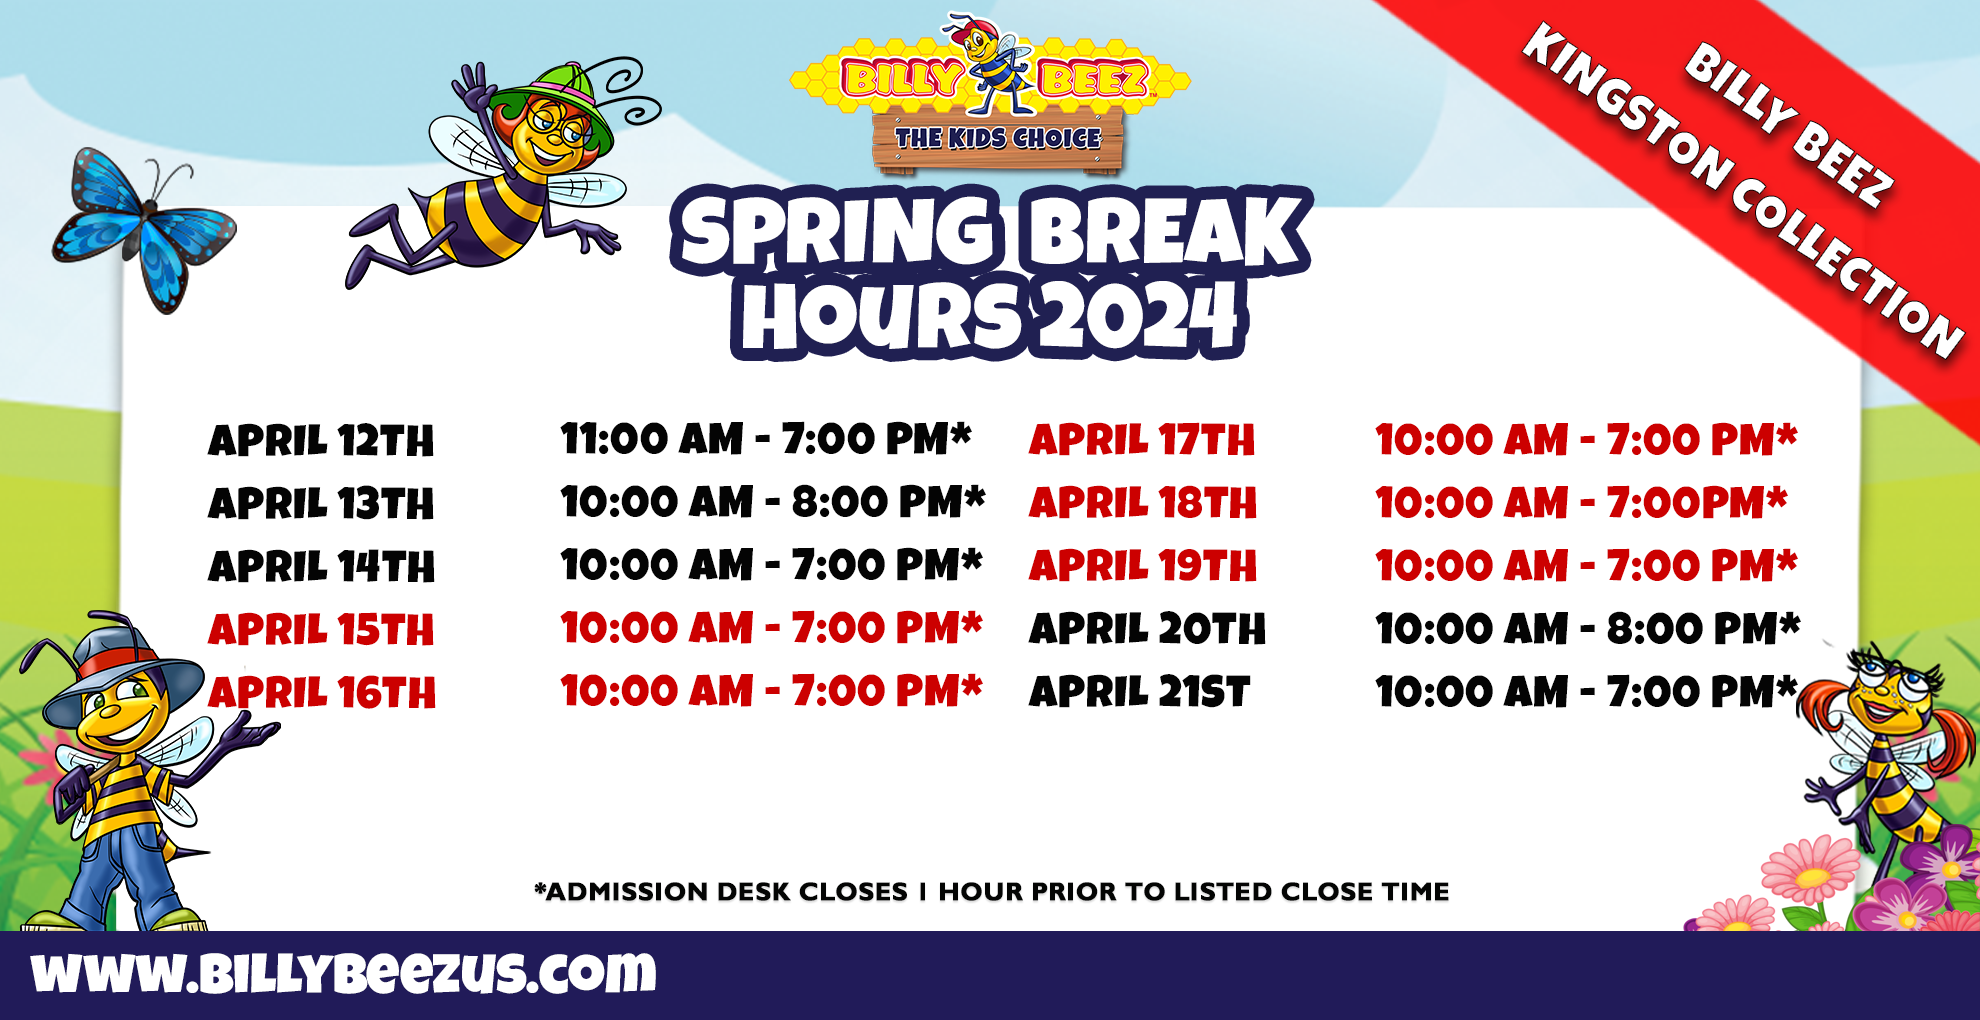 Billy Beez The Kids Choice Billy Beez Kingston Collection Spring Break Hours 2024 April 12th 11:00am-7:00pm* April 13th 10:00am-8:00pm* April 14th 10:00am-7:00pm* April 15th 10:00am-7:00pm* April 16th 10:00am-7:00pm* April 17th 10:00am-7:00pm* April 18th 10:00am-7:00pm* April 19th 10:00am-7:00pm* April 20th 10:00am-8:00pm* April 21st 10:00am-7:00pm* *Admission desk closes 1 hour prior to listed close time www.billybeezus.com